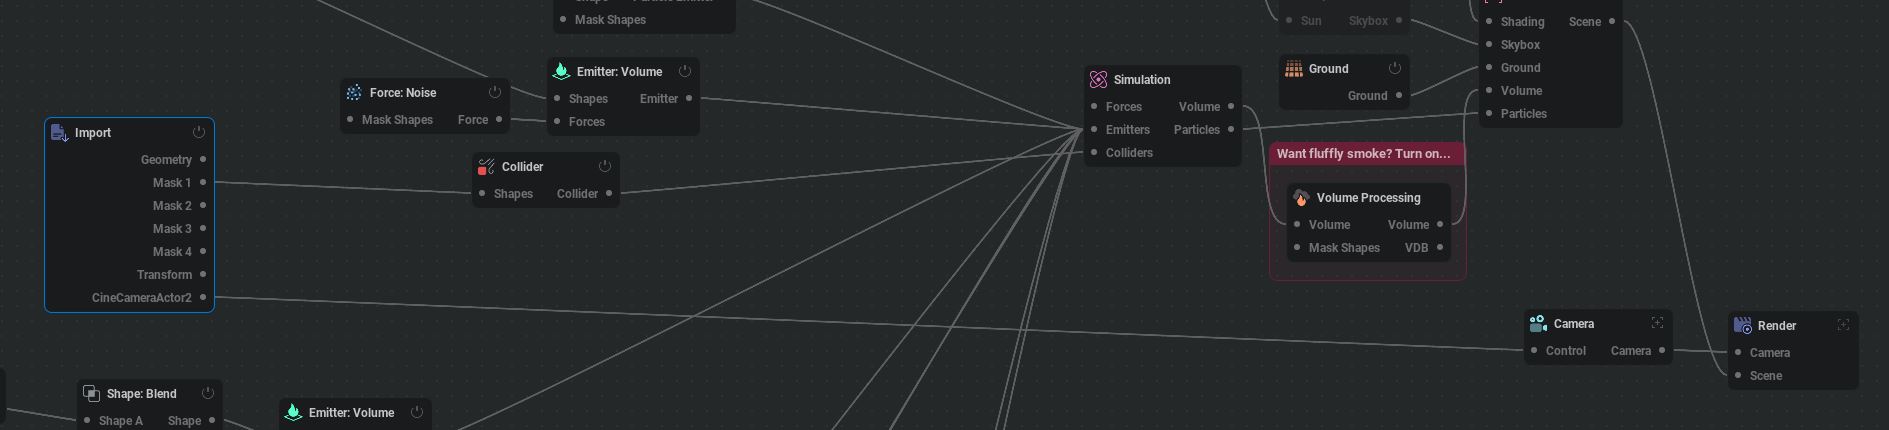 Detail of import and camera nodes.